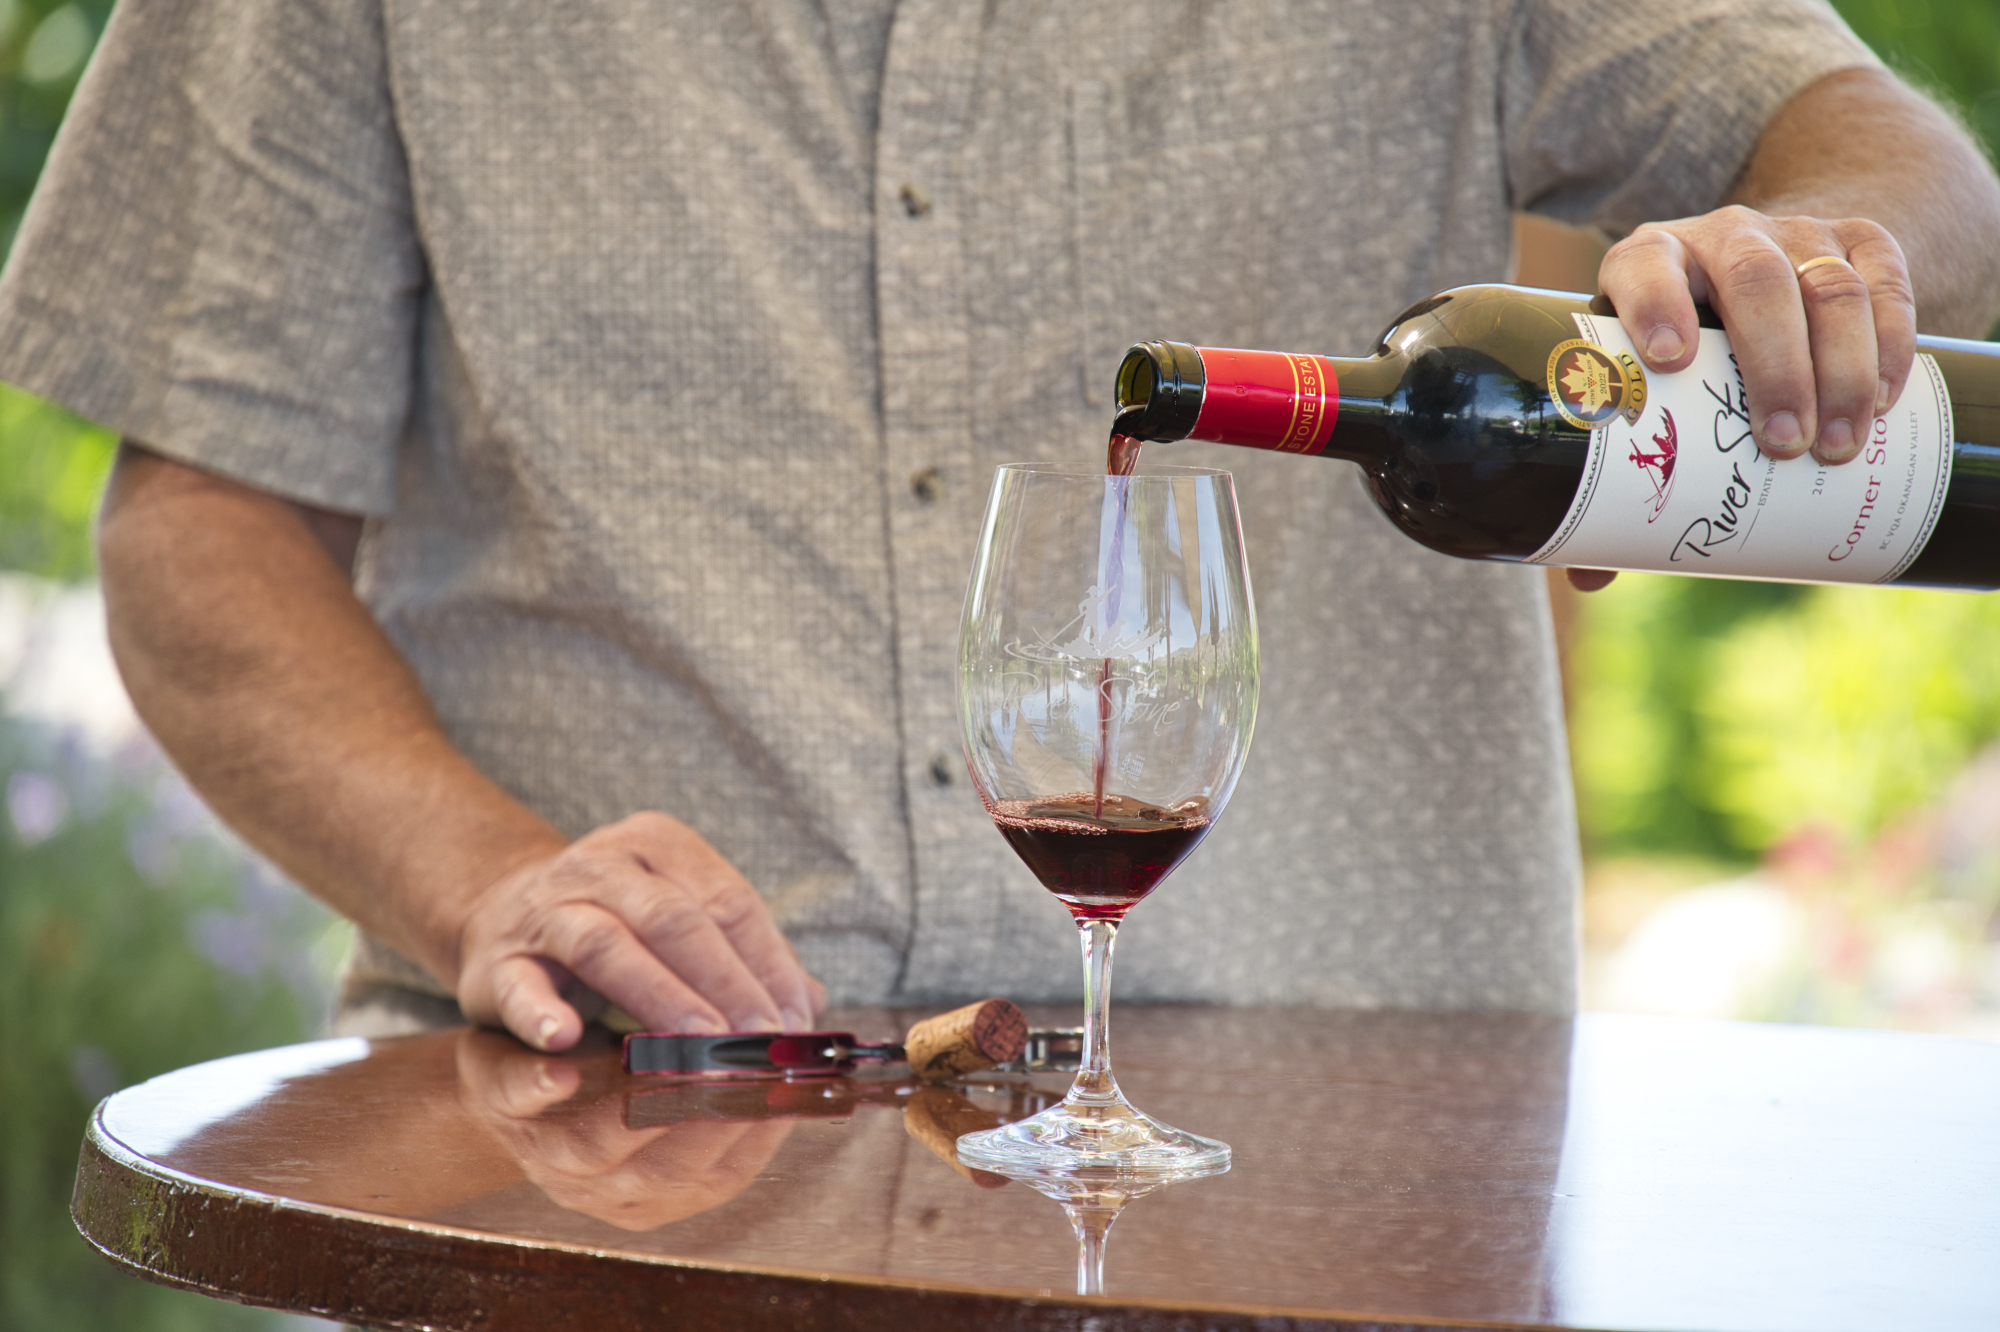 Uncork a bottle of bordeaux style wine and savor the experience